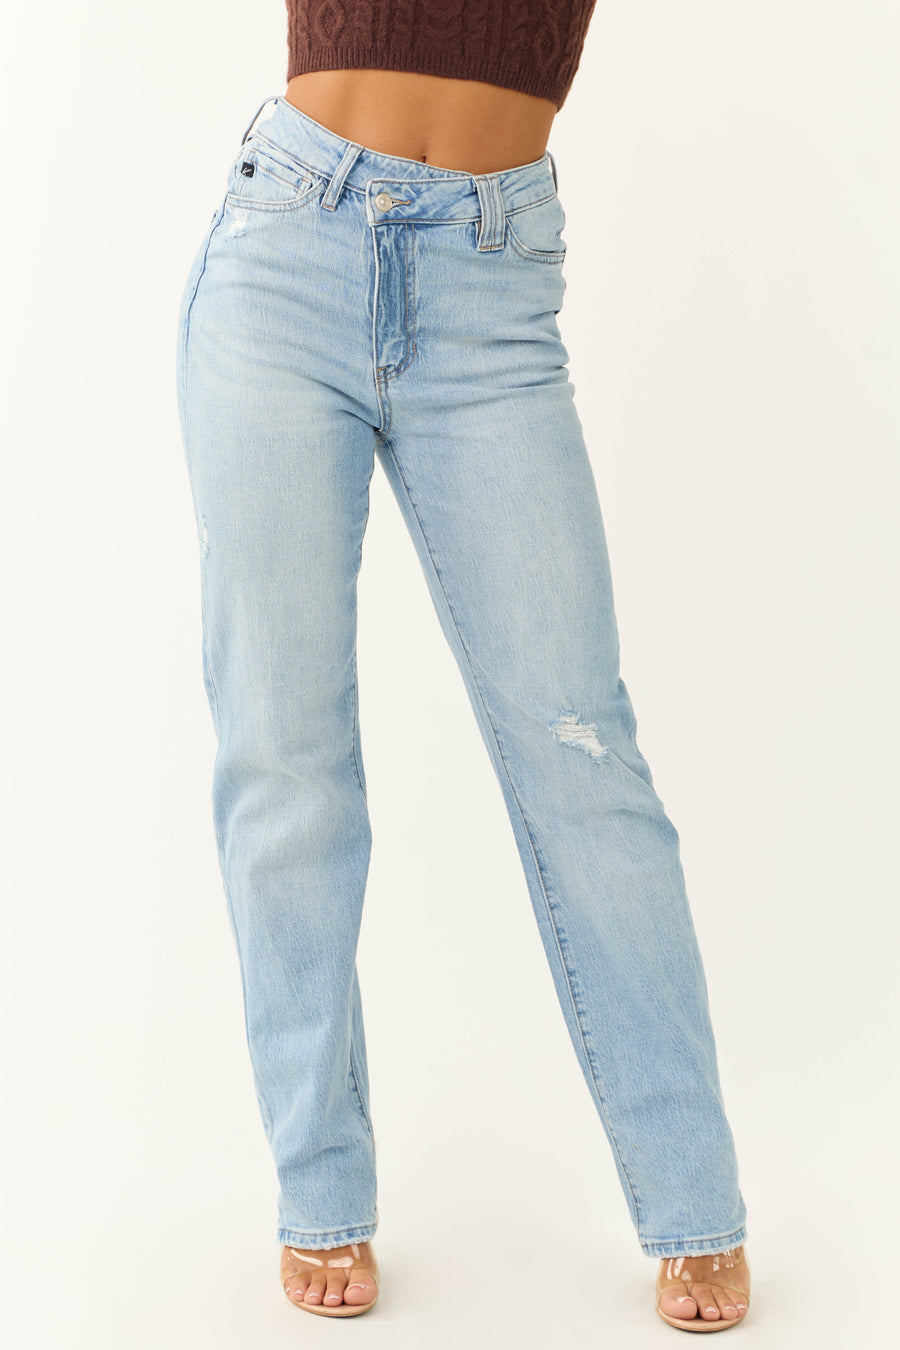 KanCan Light Wash High Rise 90's Straight Jeans